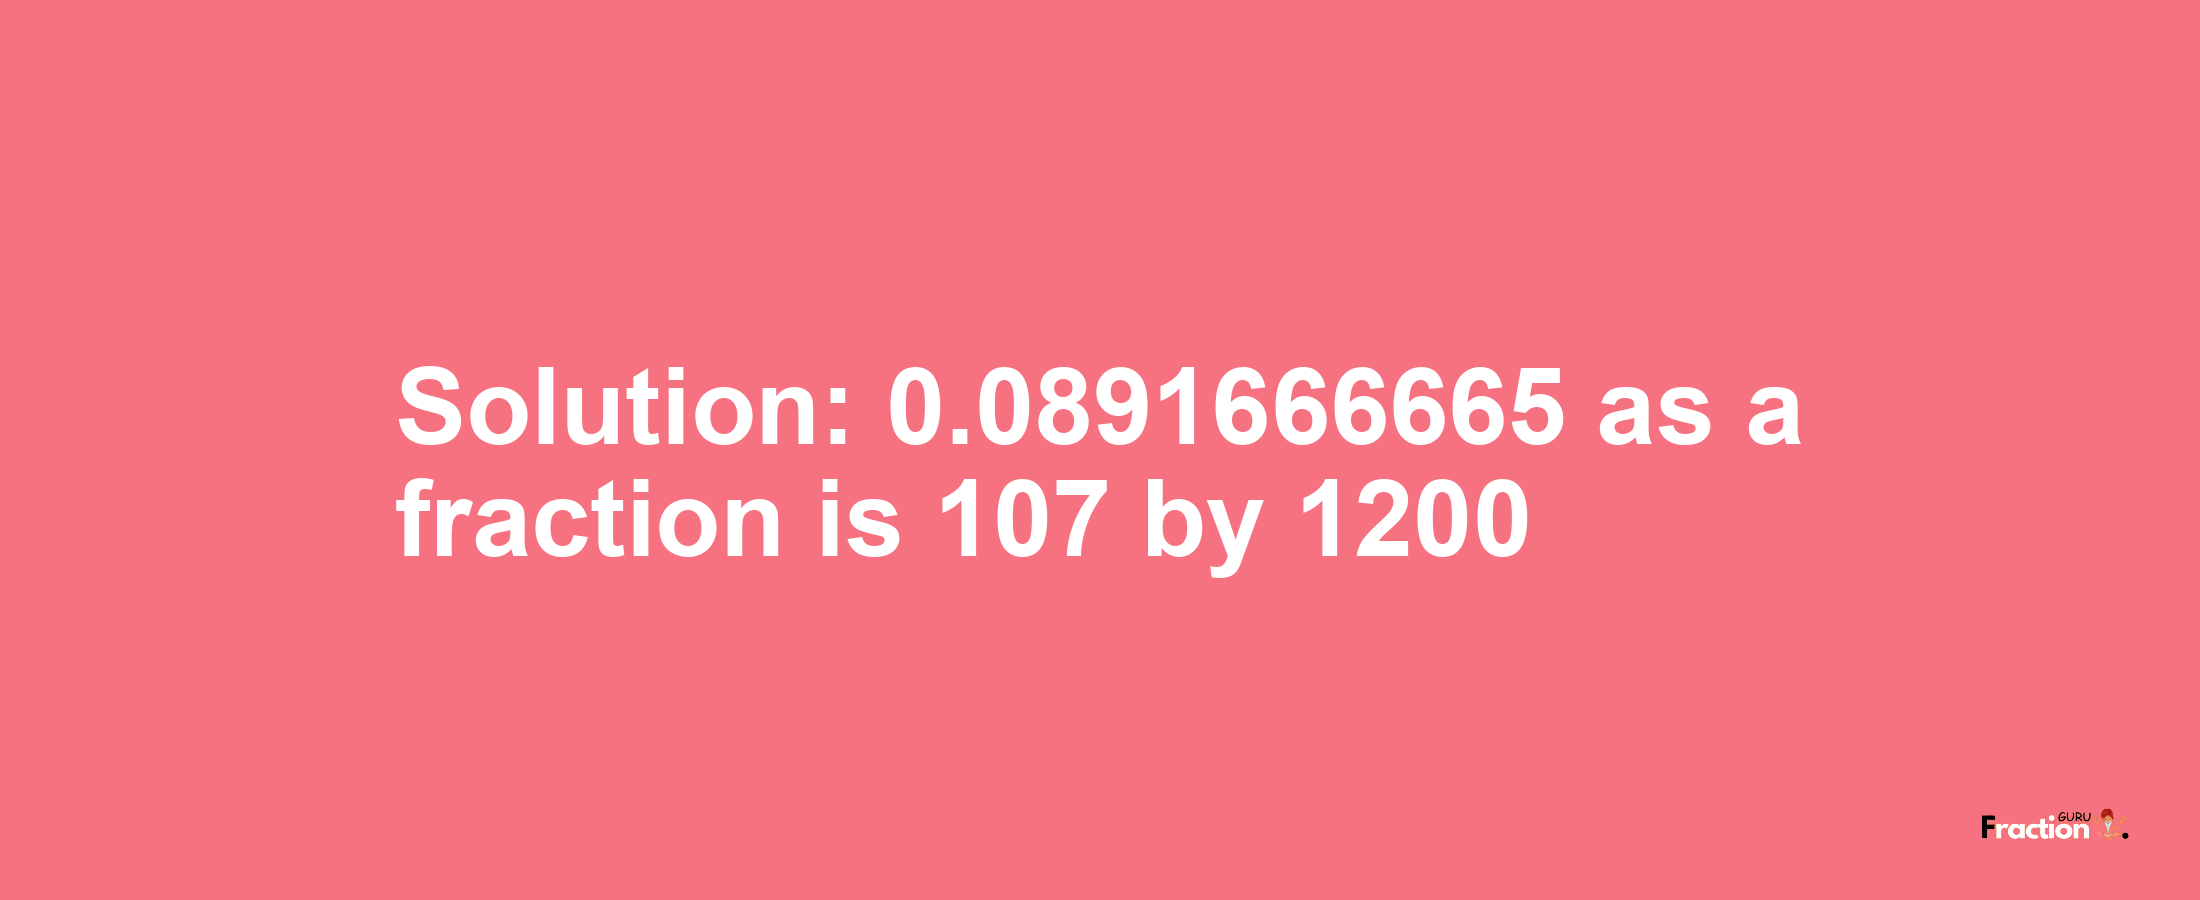 Solution:0.0891666665 as a fraction is 107/1200